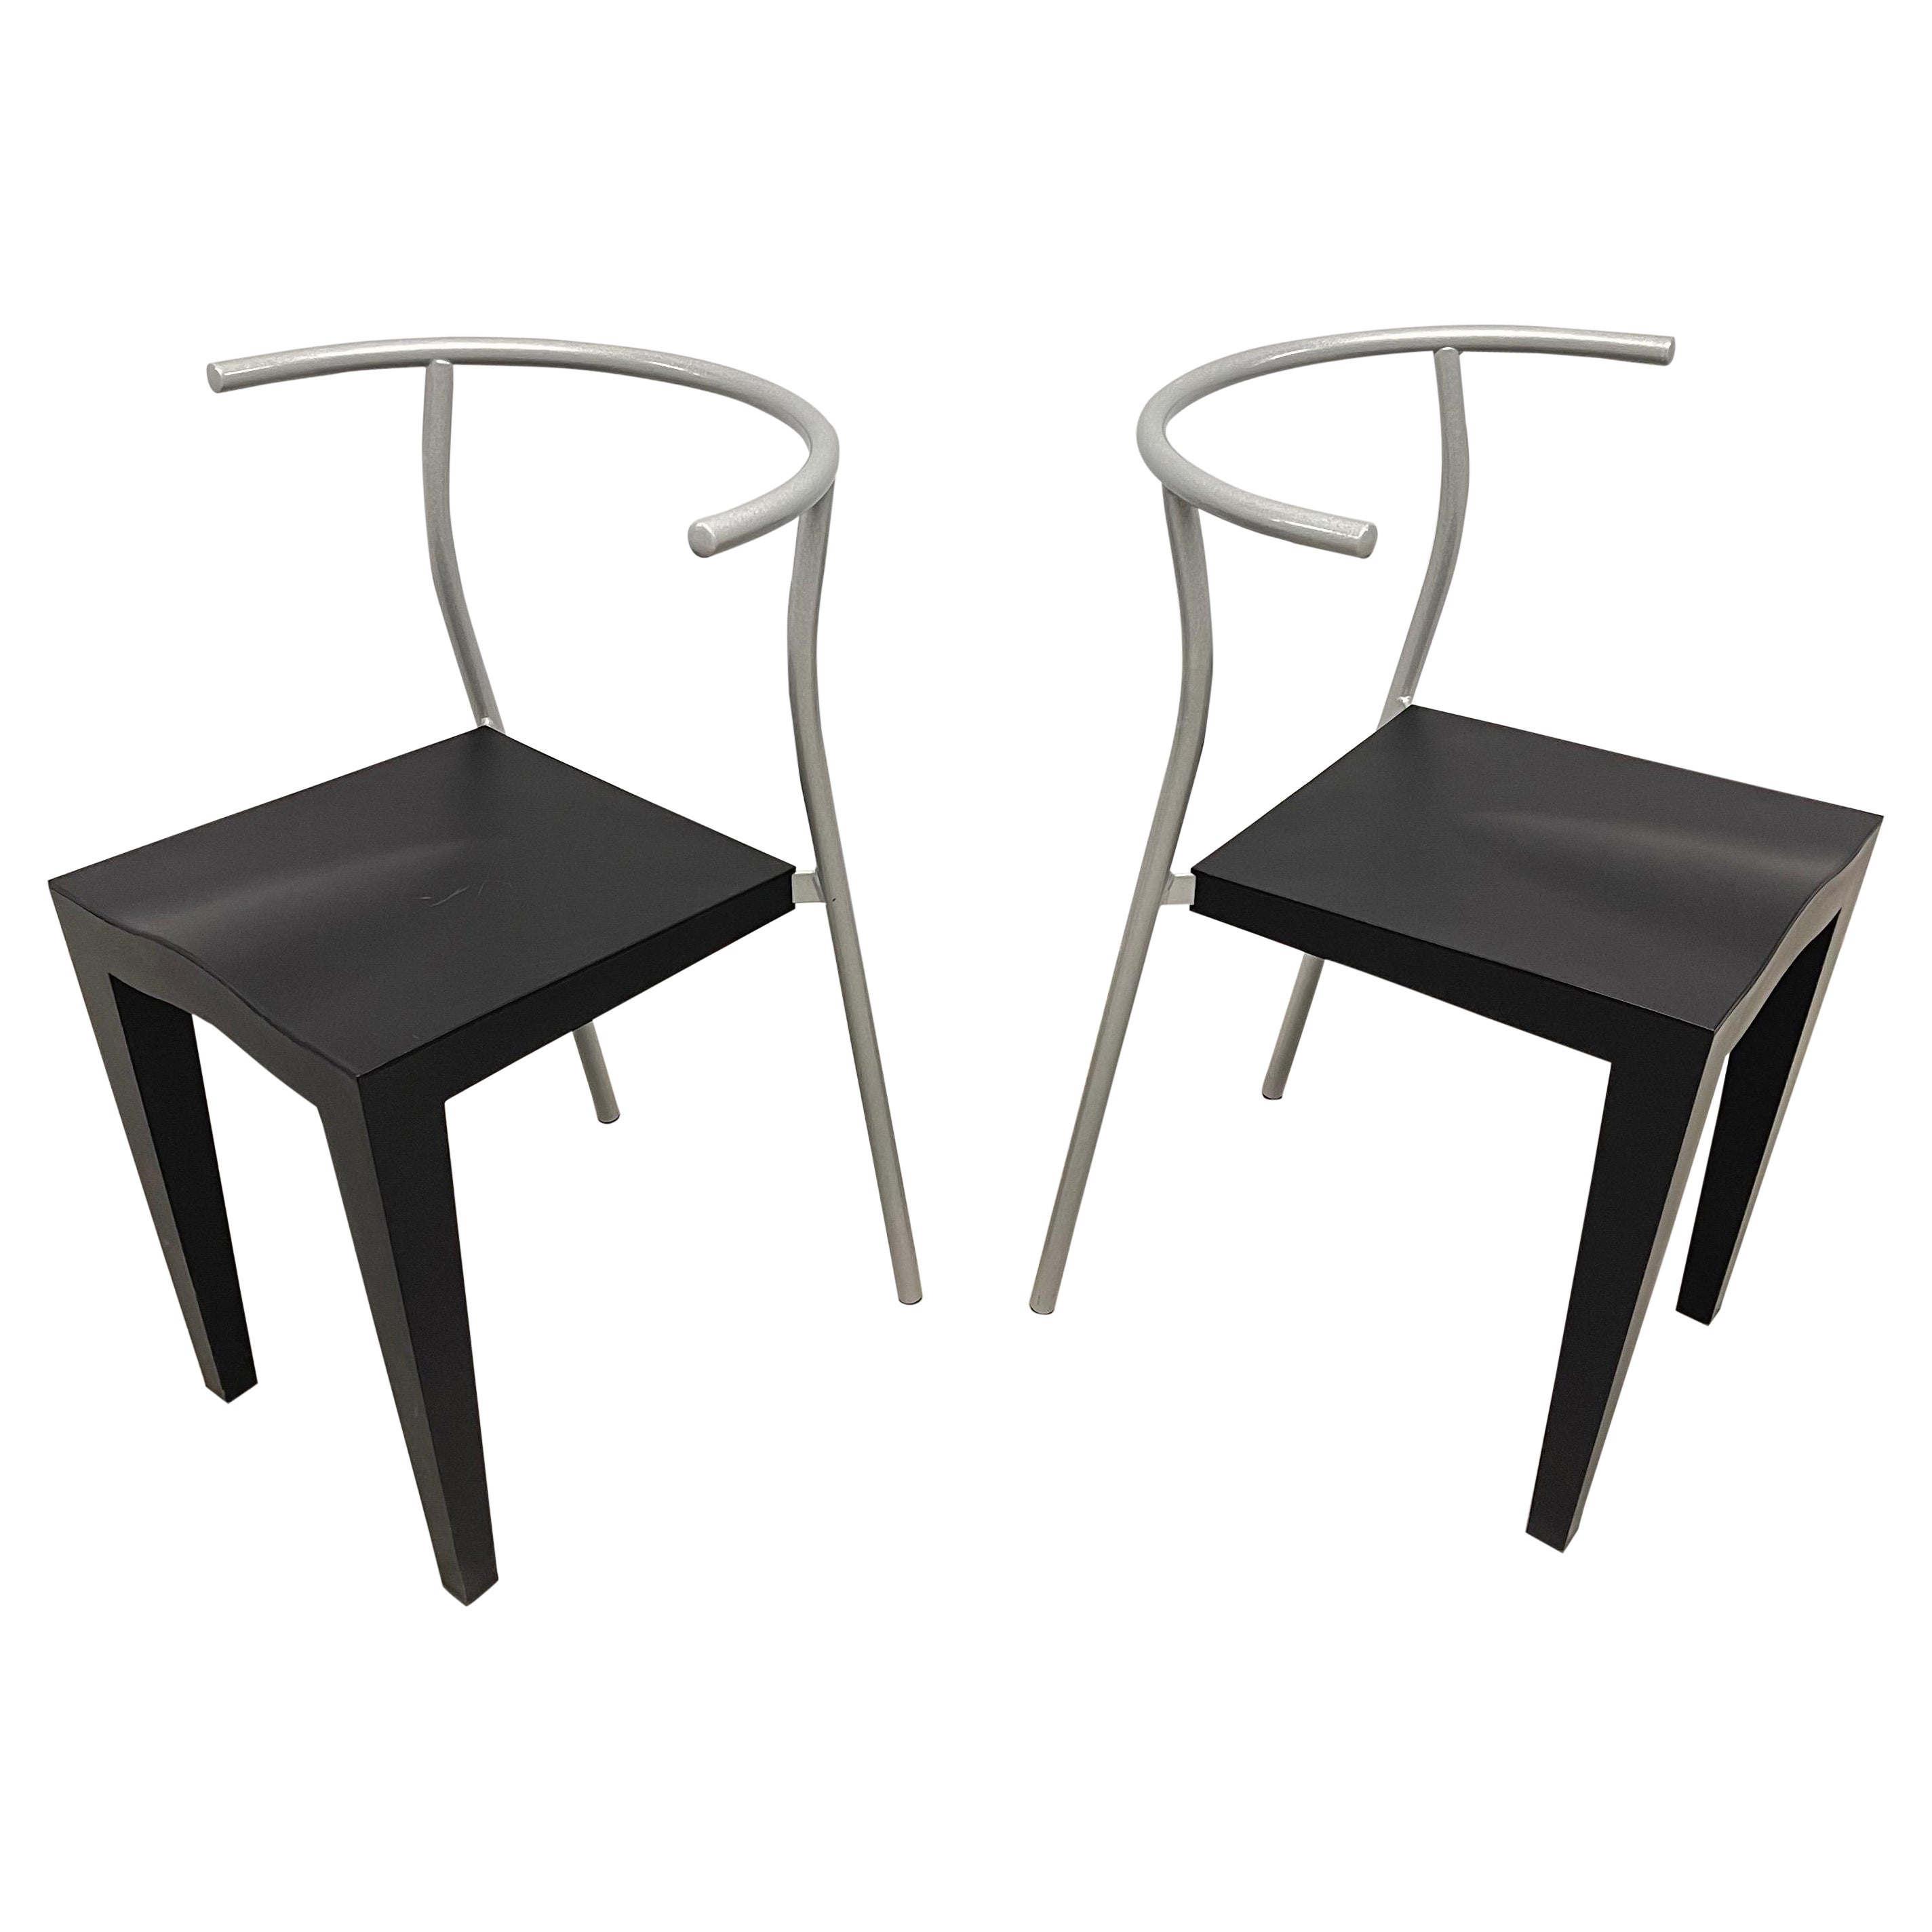 Pair of Postmodern "Dr Glob" Chairs by Philippe Starck for Kartell, Italy, 1990 For Sale